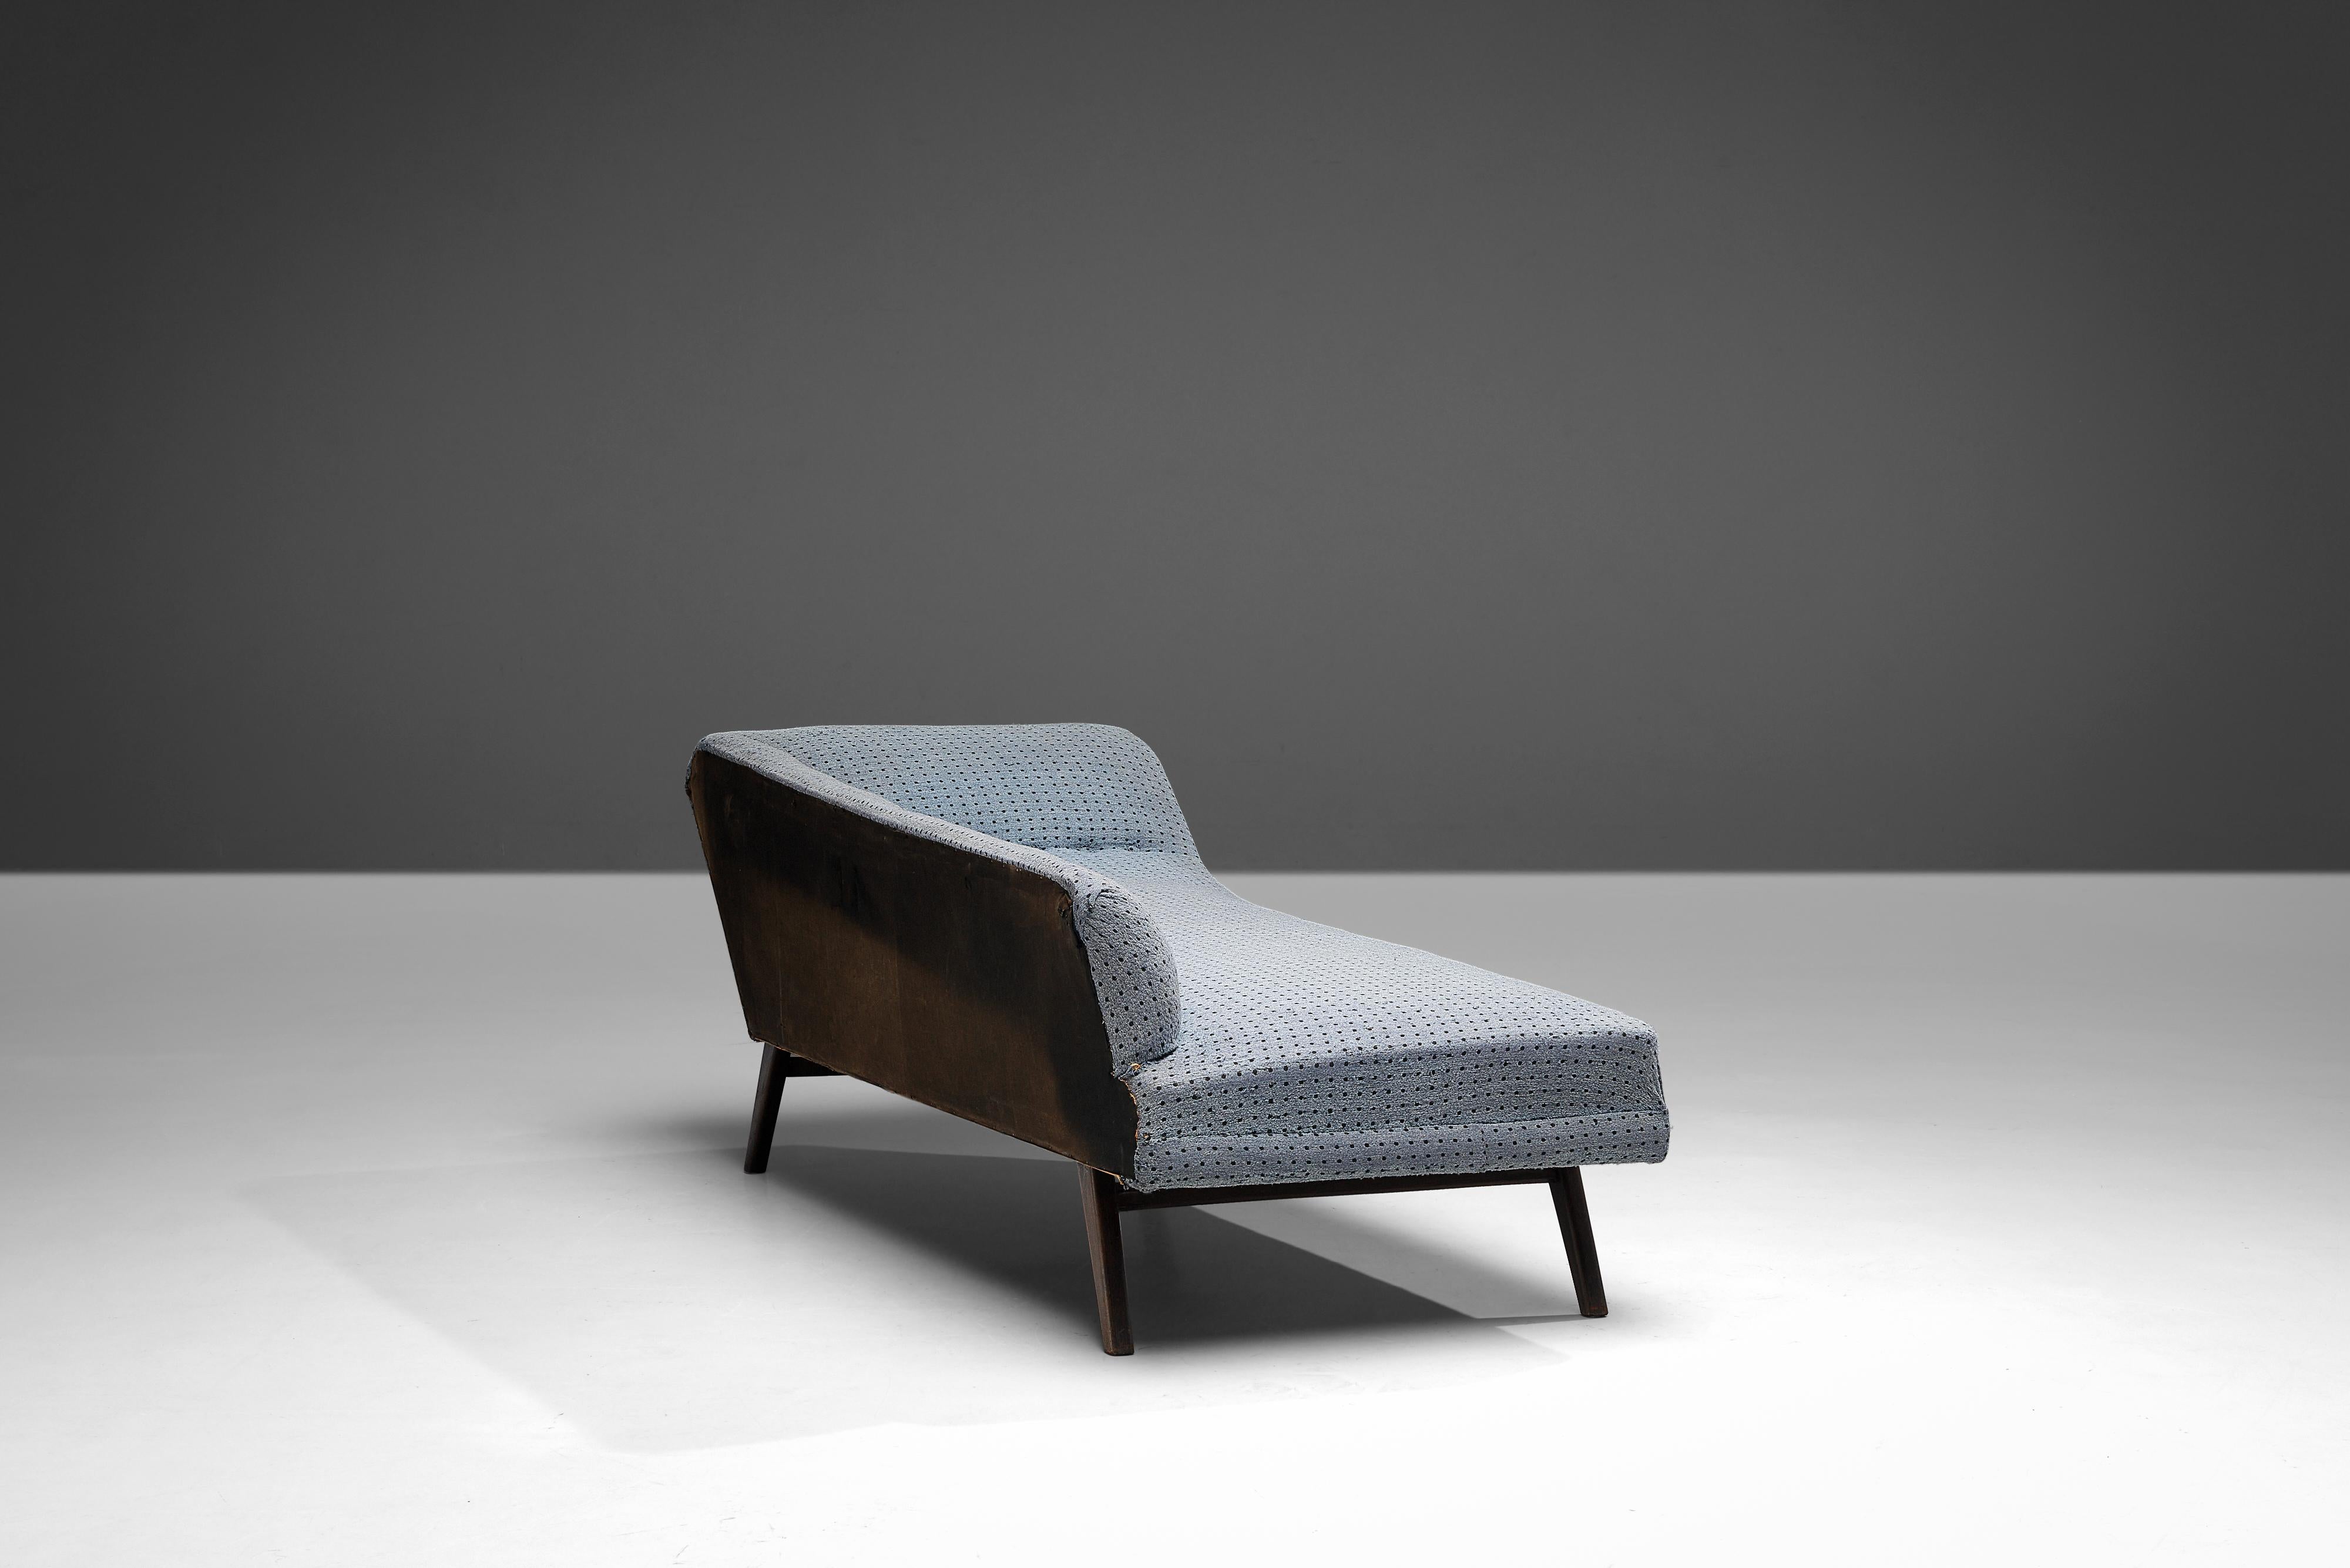 Danish Chaise Longue in Ice Blue Dotted Upholstery 2